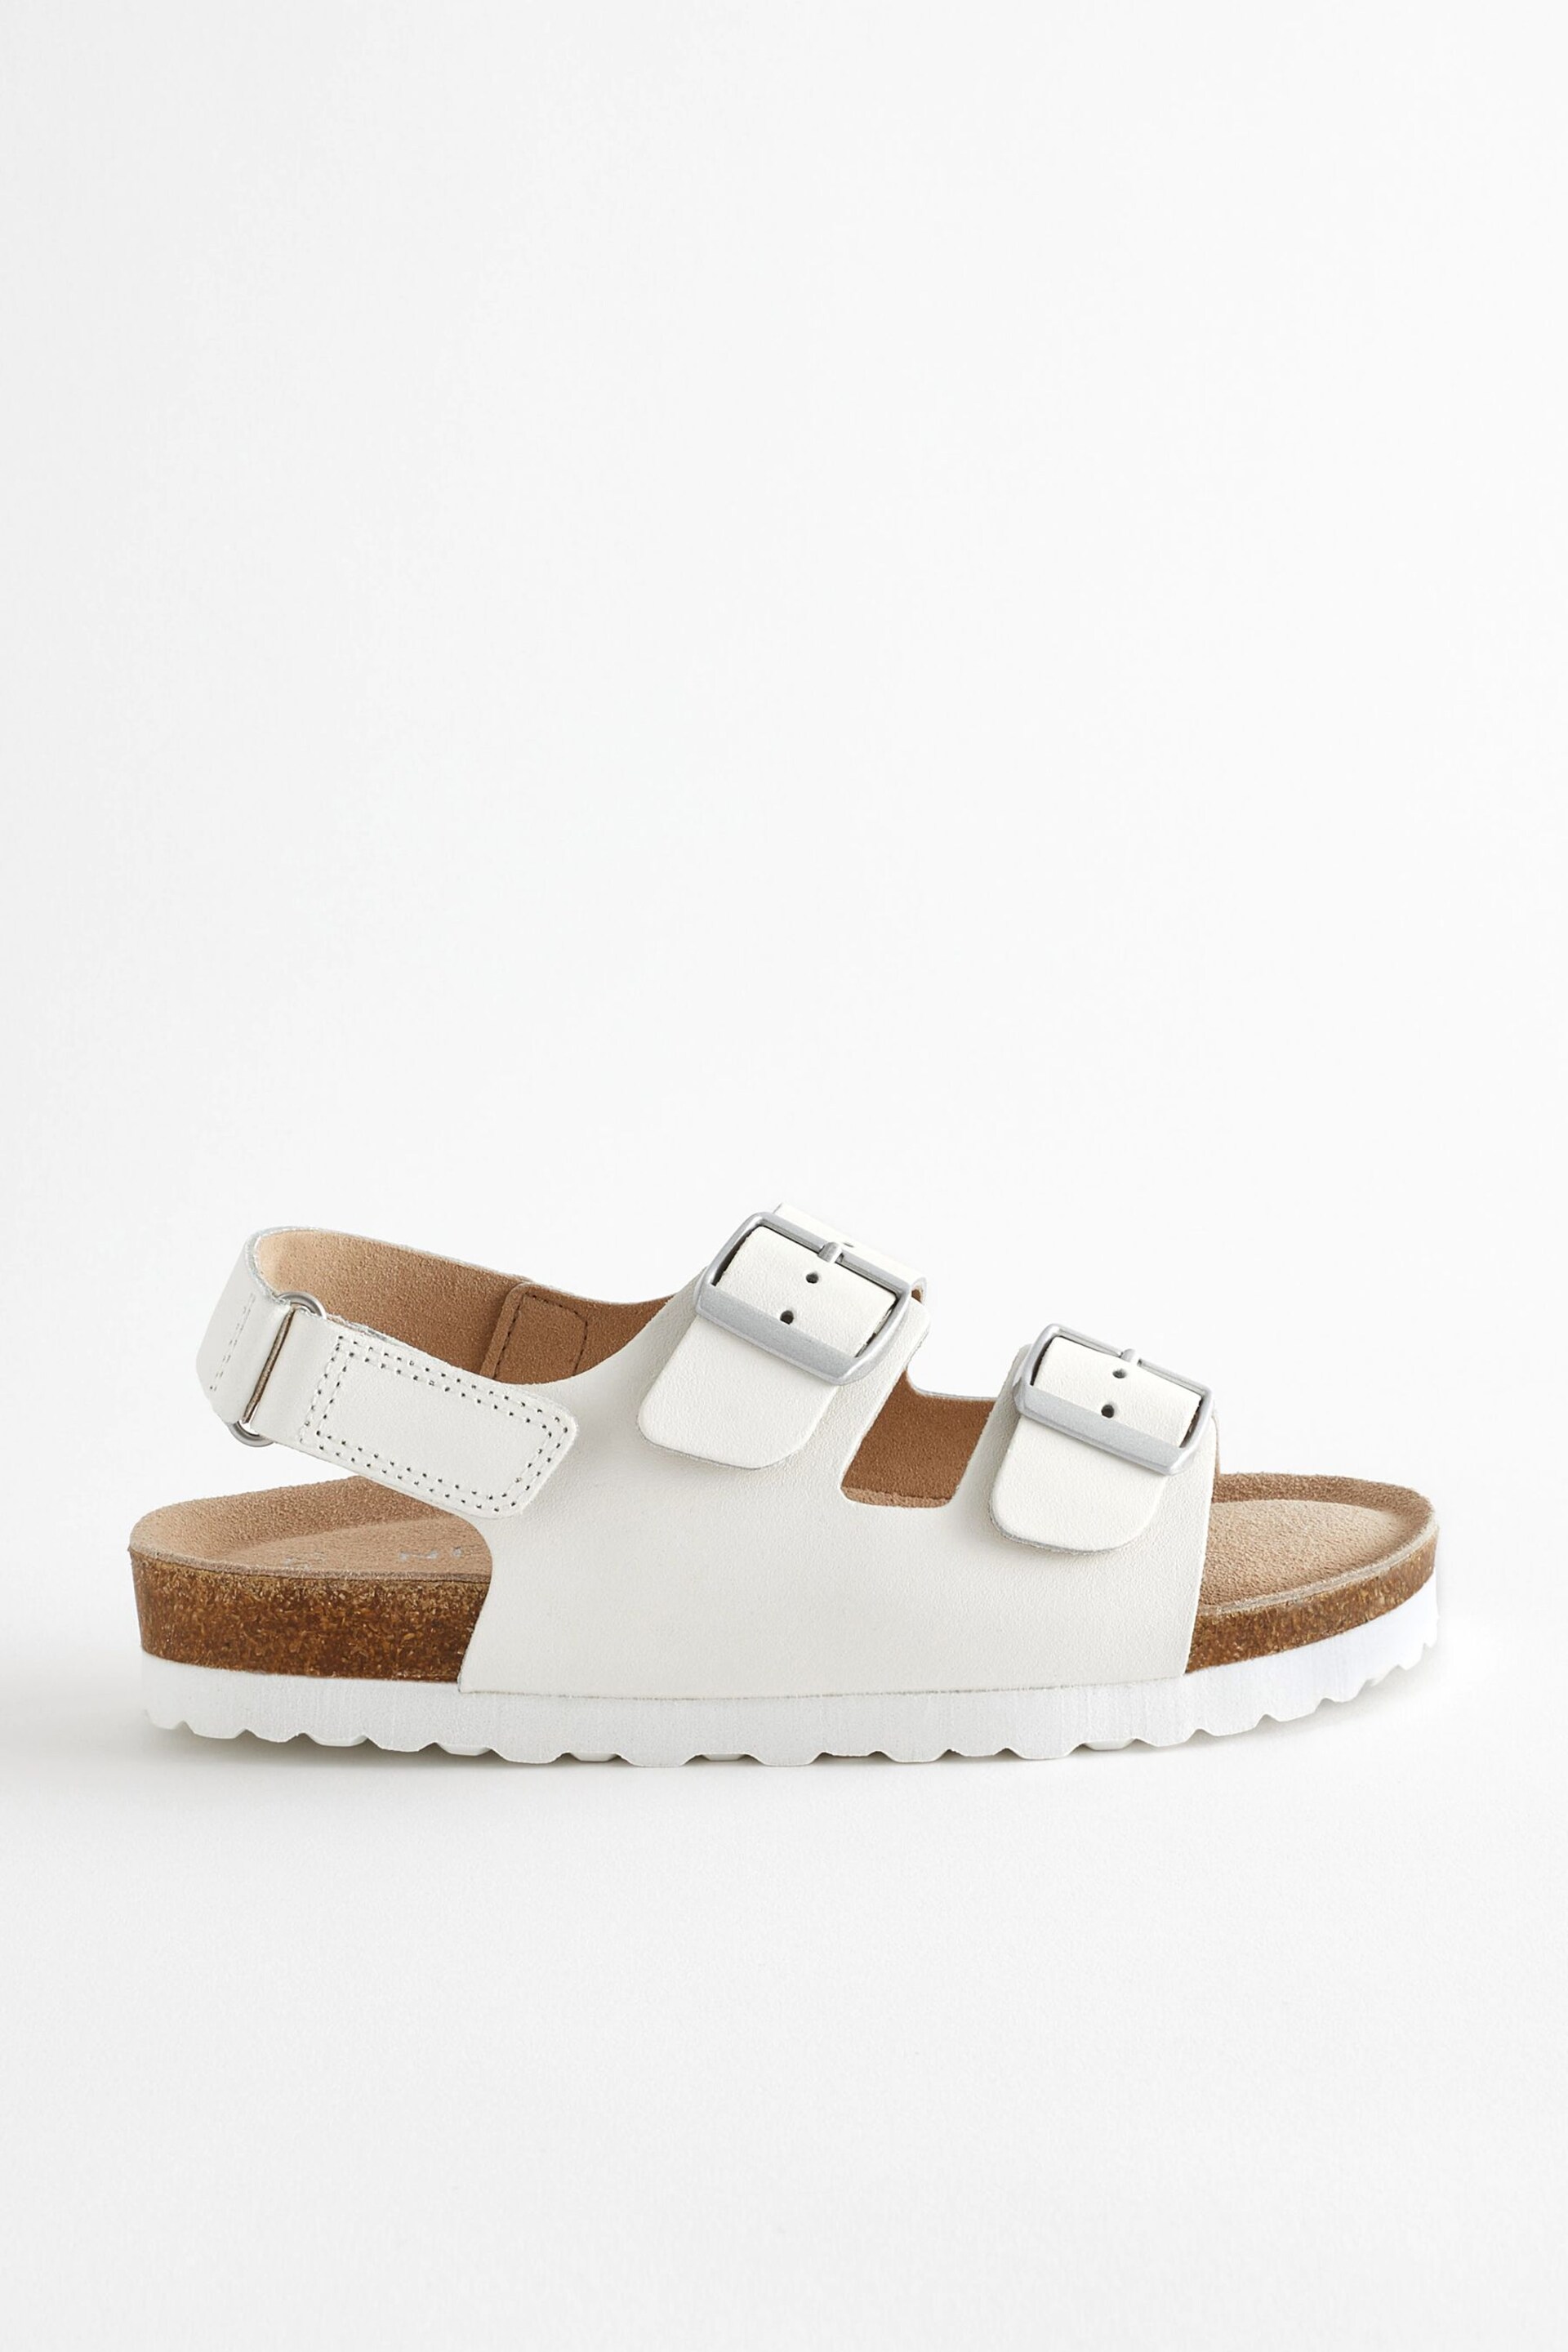 White Leather Wide Fit (G) Two Strap Corkbed Sandals - Image 2 of 6